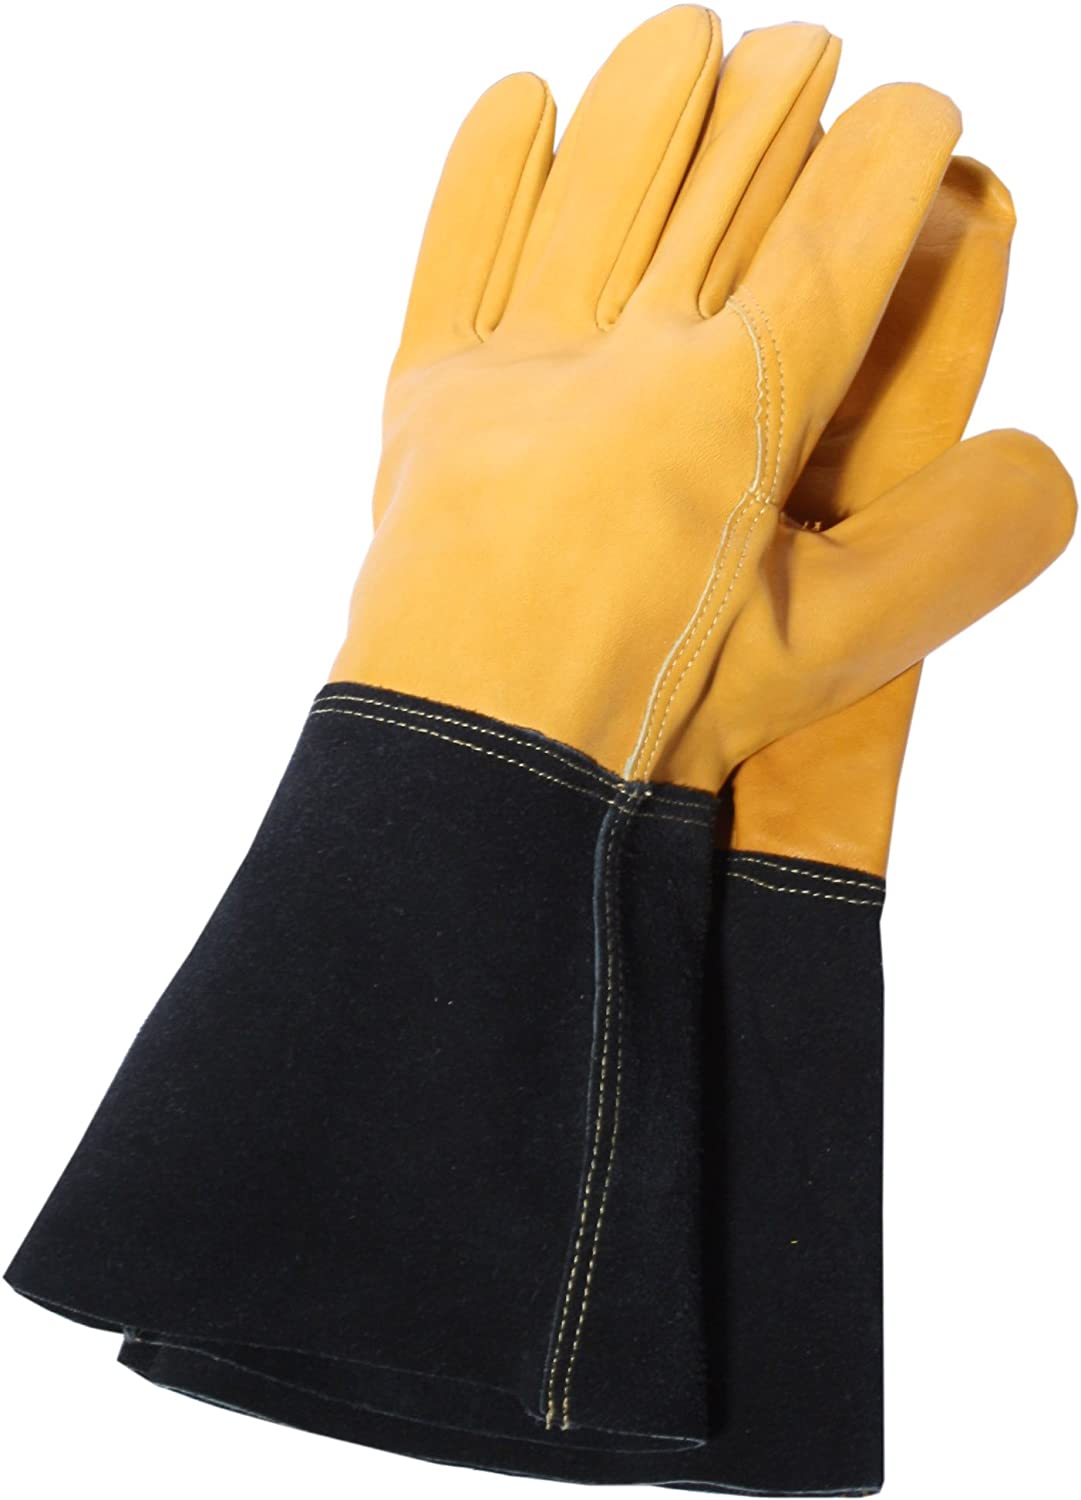 Image of Town & Country Deluxe Premium Leather Gauntlet Gloves Large